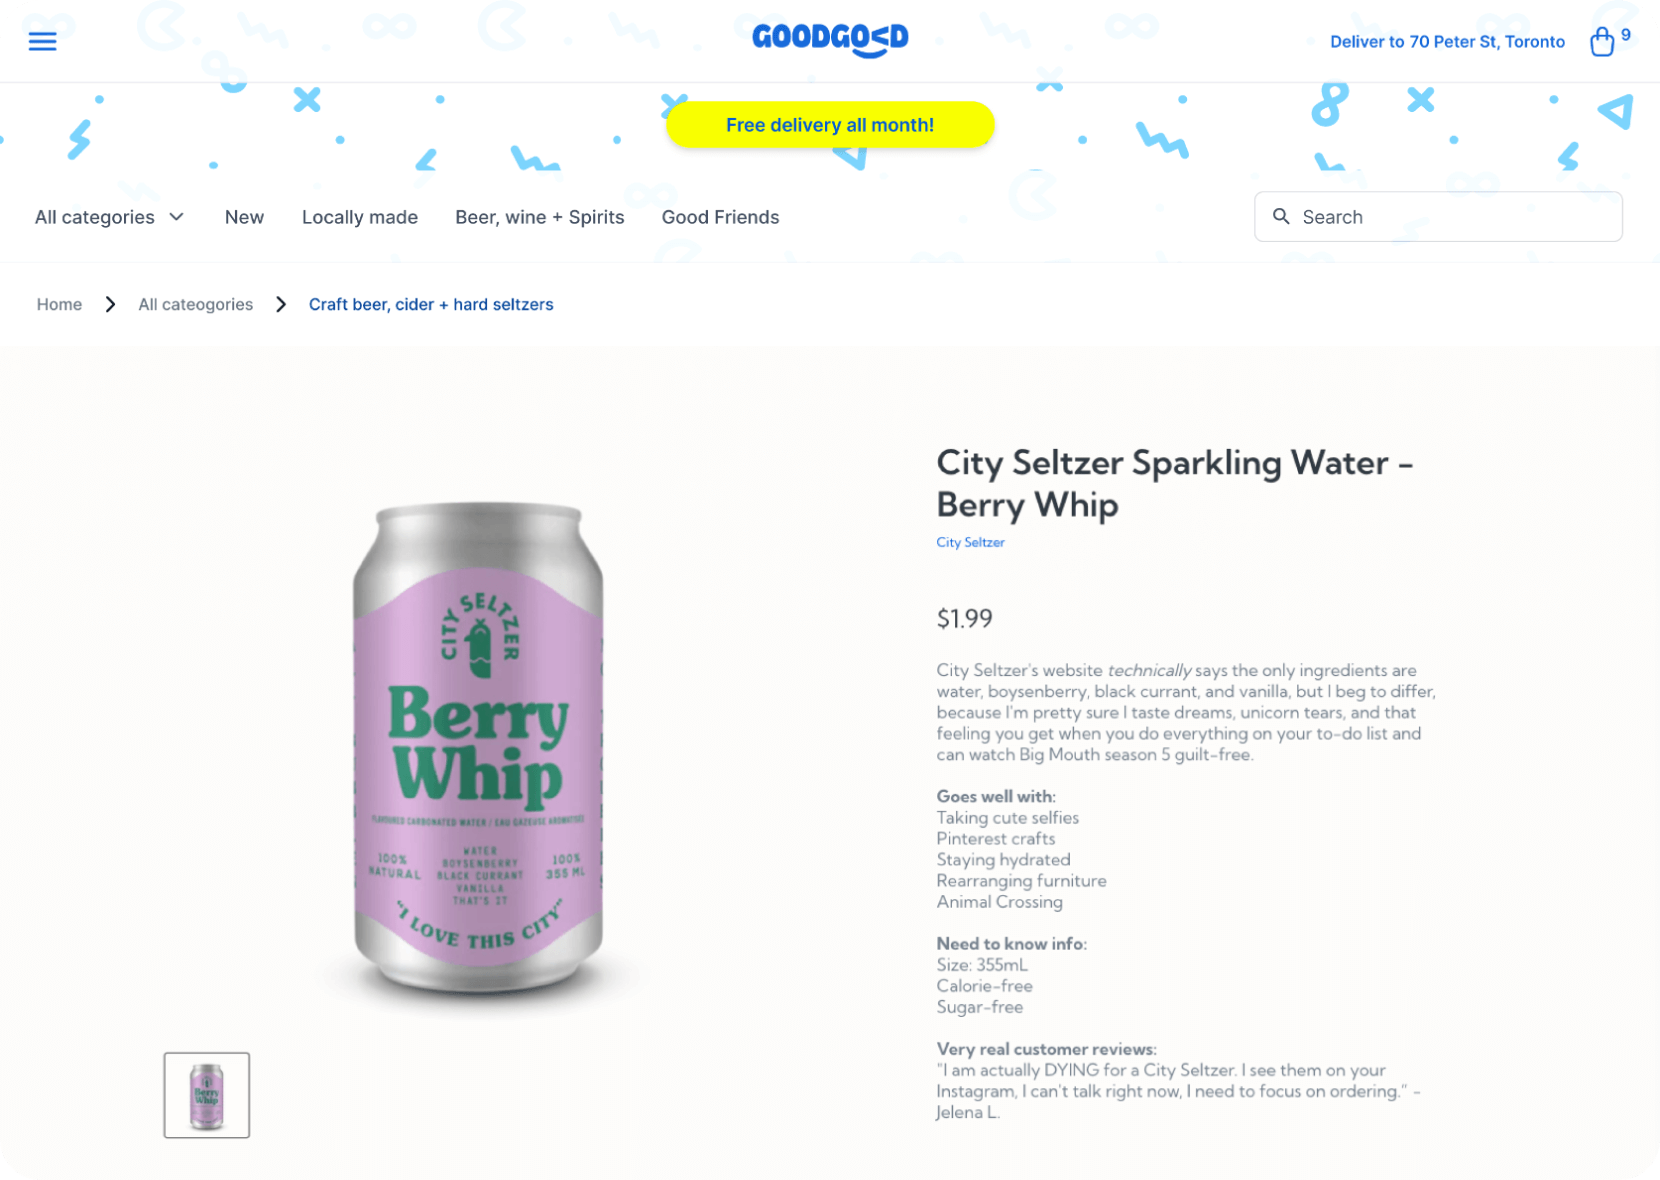 Picture of GoodGood Berry Whip Seltzer with description